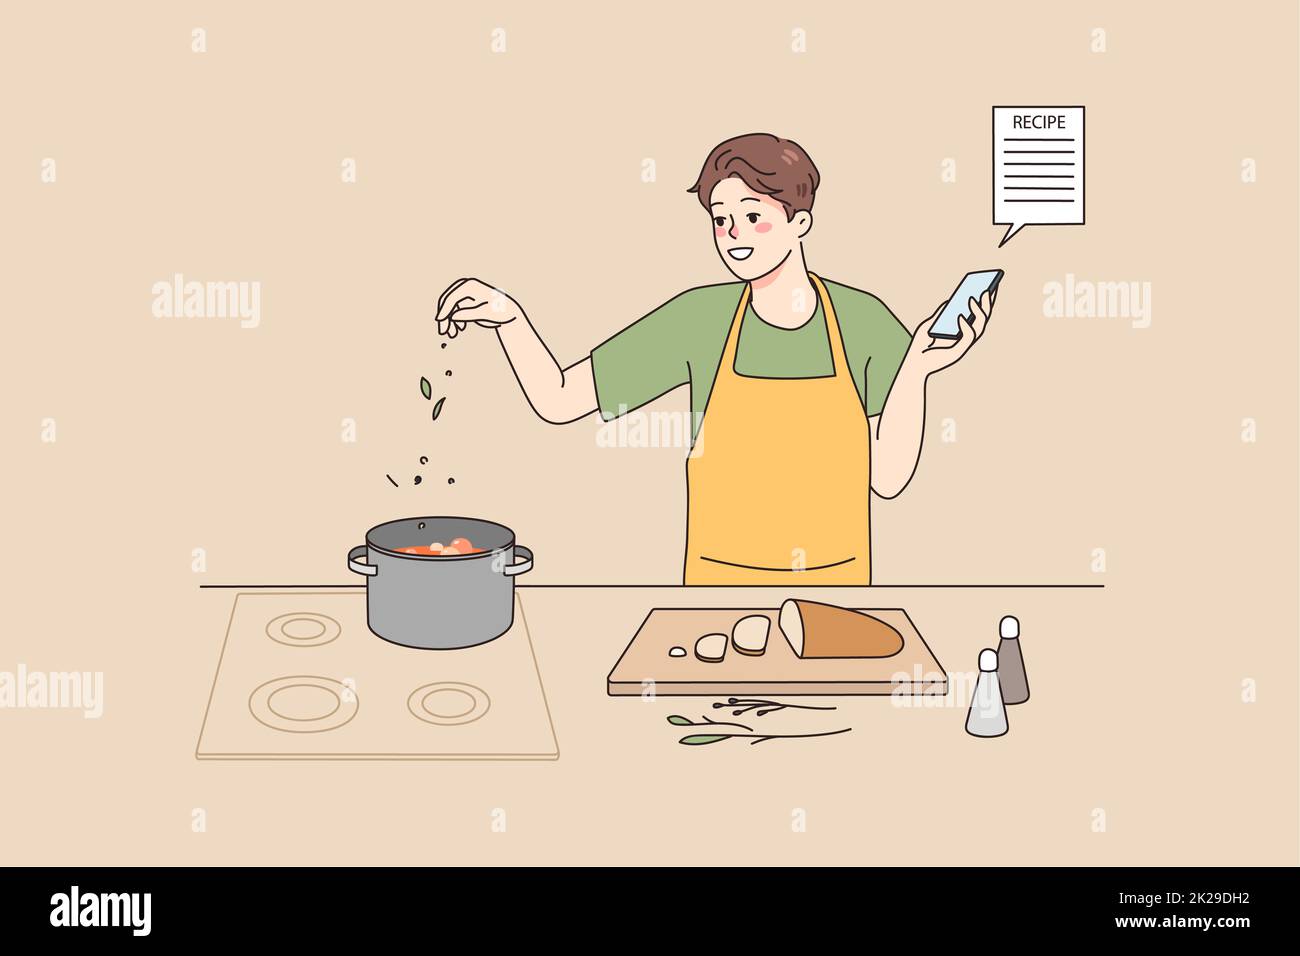 Smiling man cooking with recipe on cellphone Stock Photo